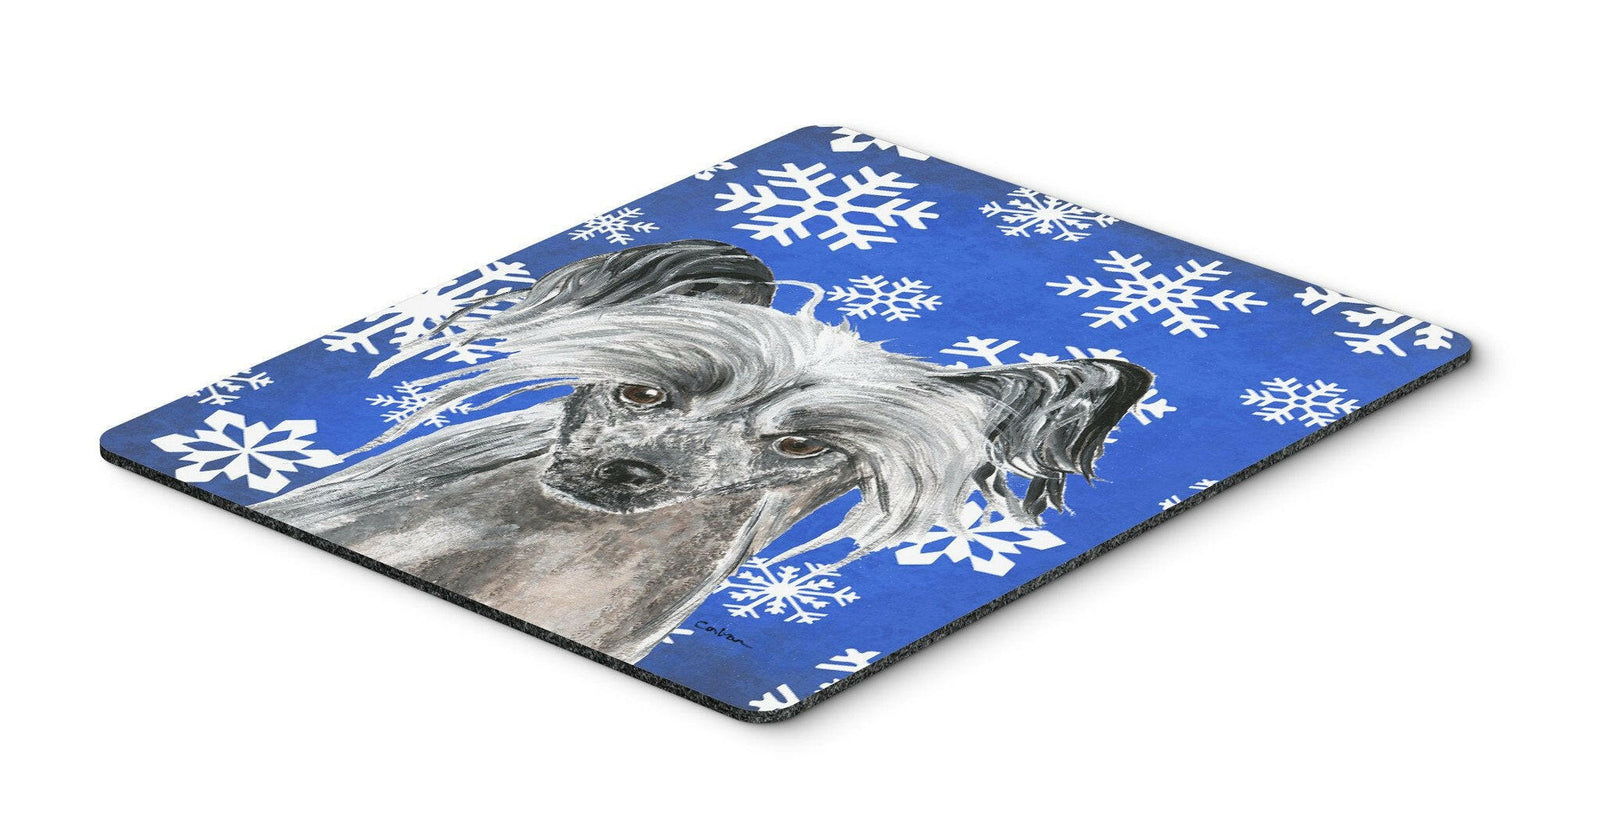 Chinese Crested Blue Snowflake Winter Mouse Pad, Hot Pad or Trivet by Caroline's Treasures